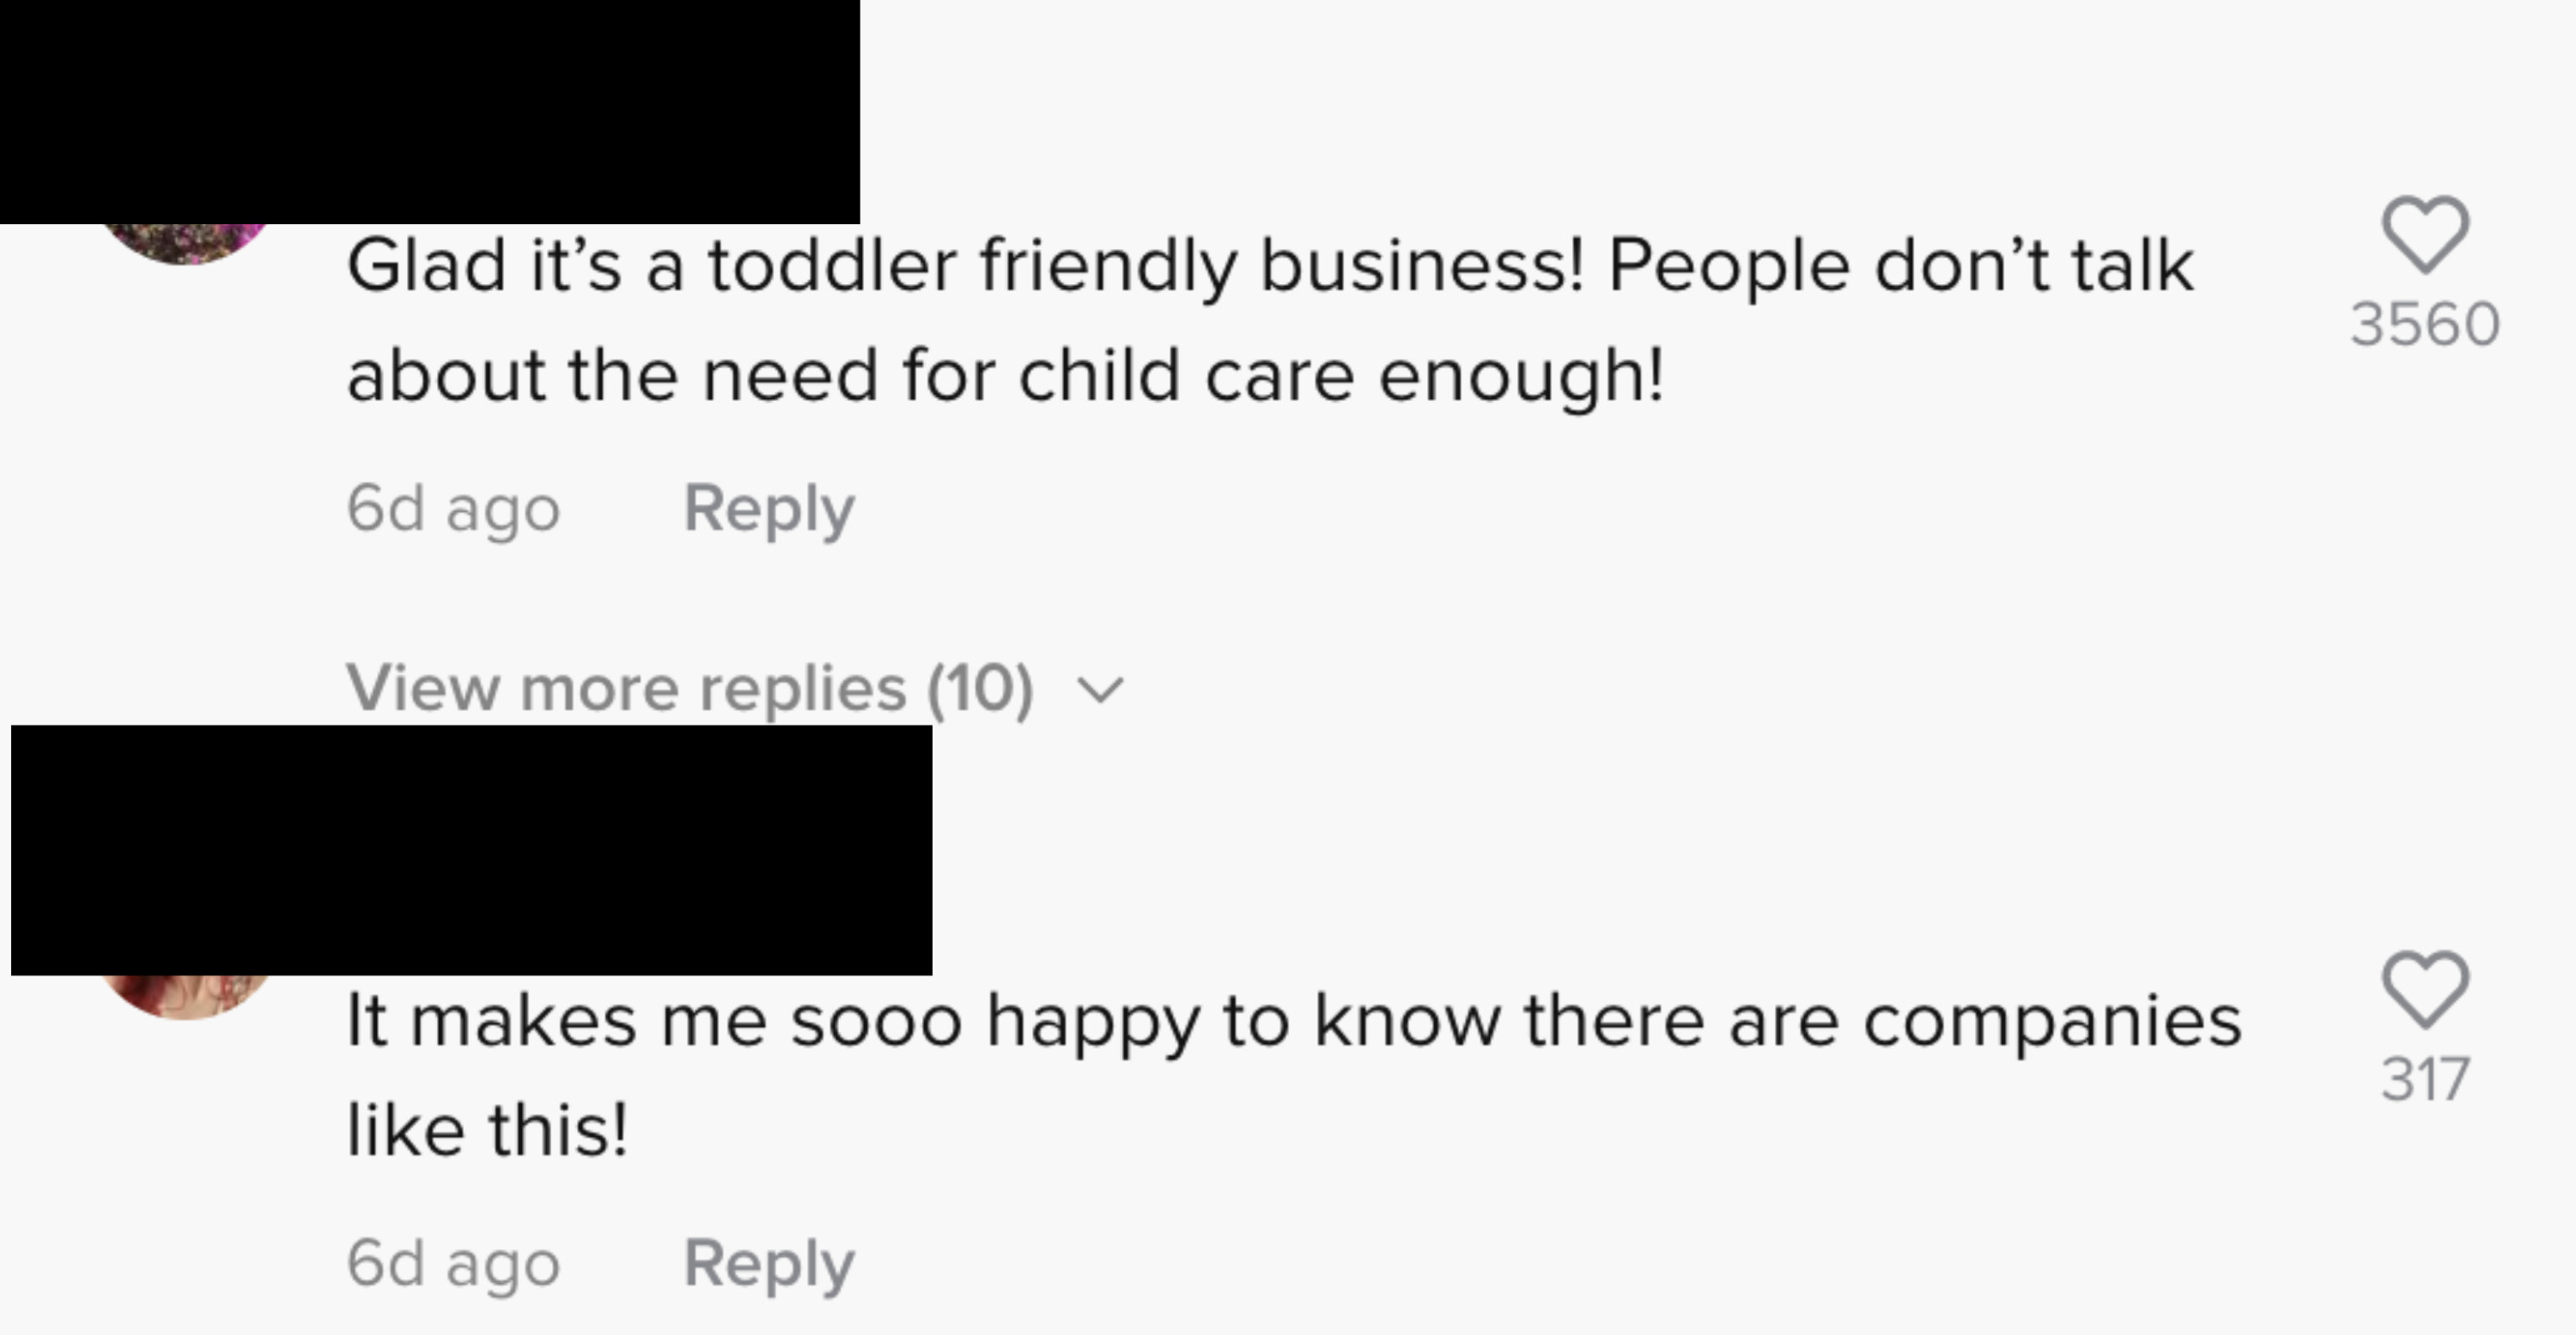 One person said &quot;It makes soo happy to know there are companies like this!&quot;